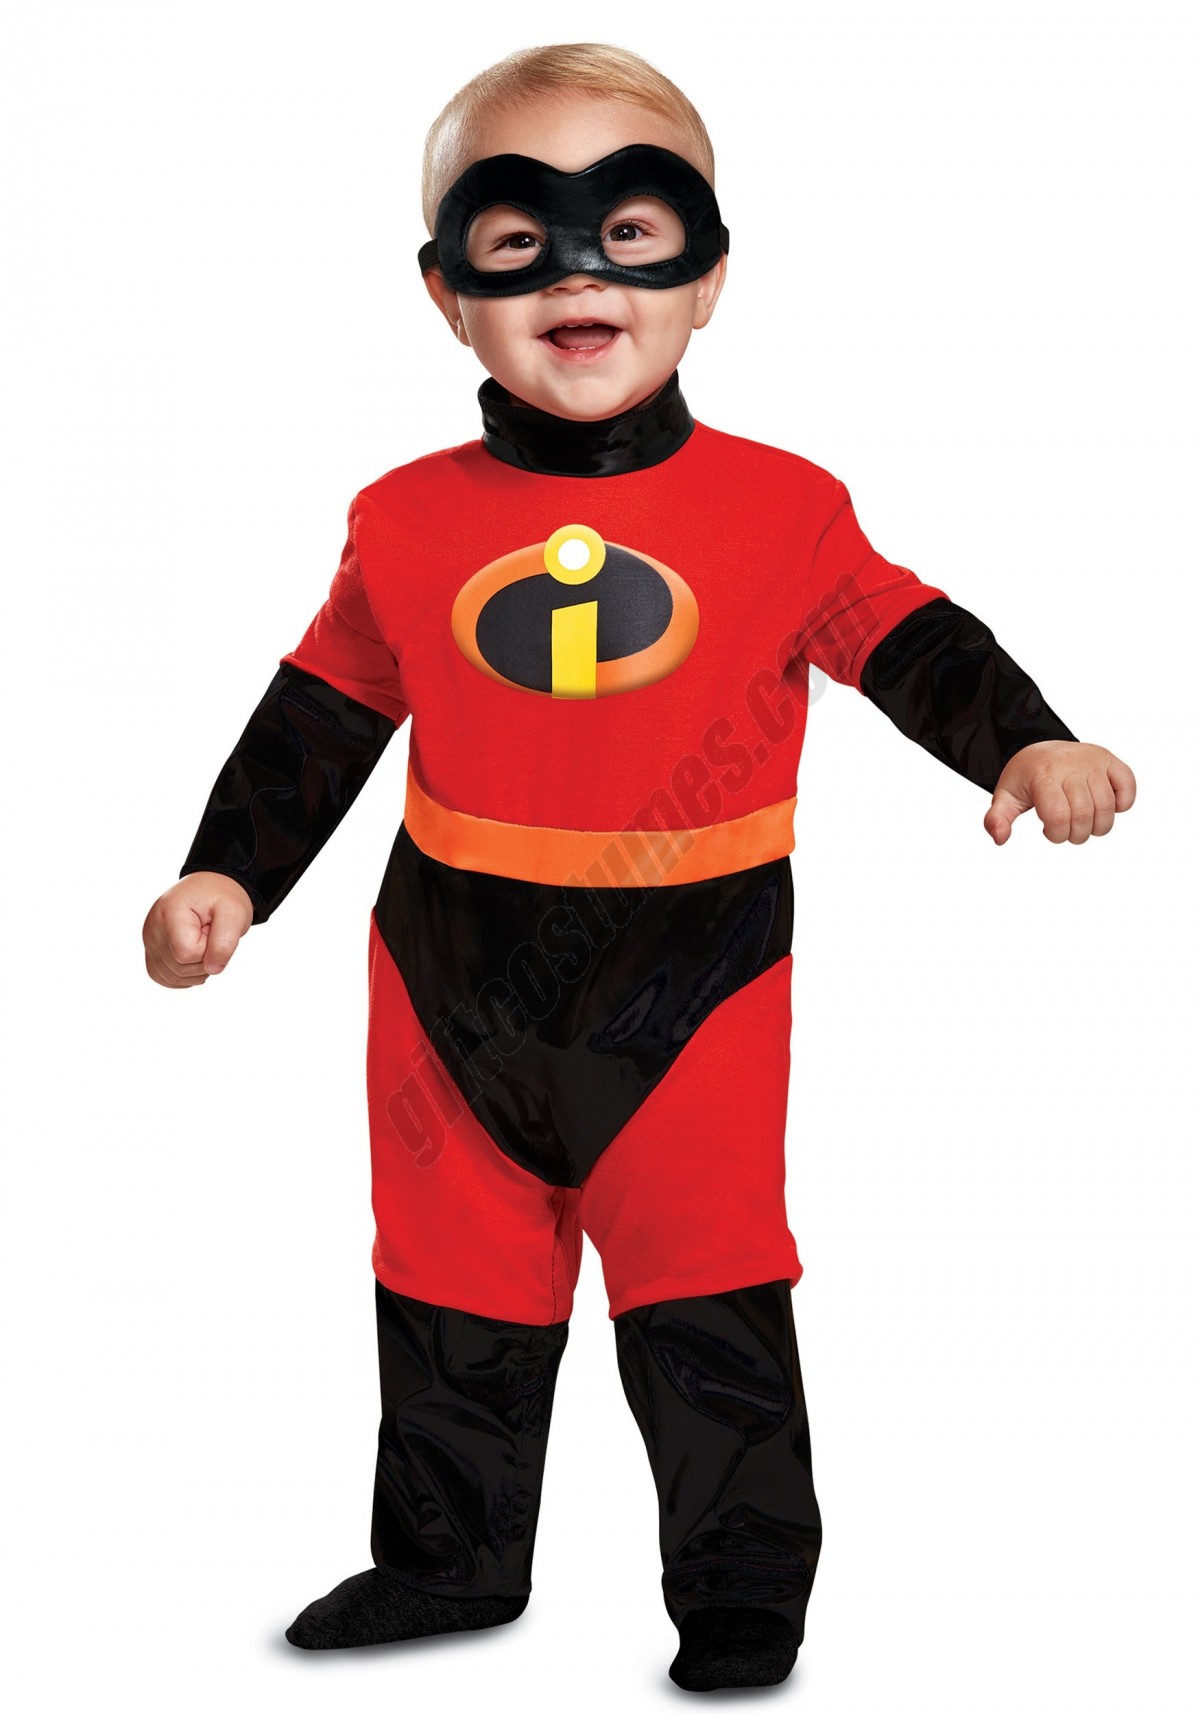 Disney Incredibles 2 Classic Baby Costume Promotions - -0